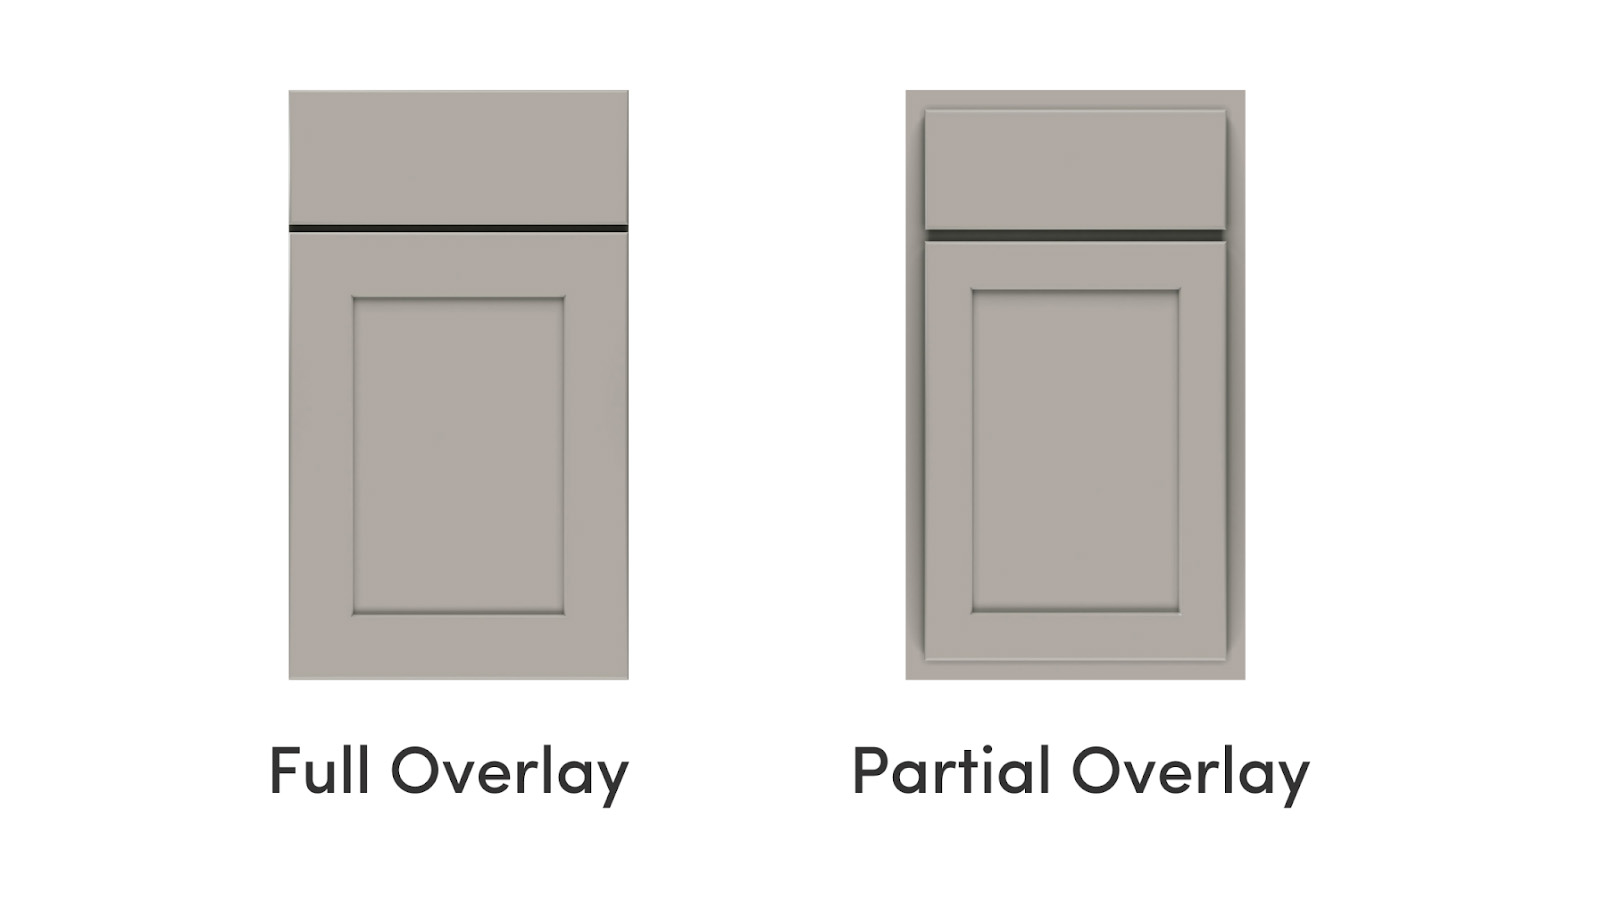 Full overlay and partial overlay cabinet door types